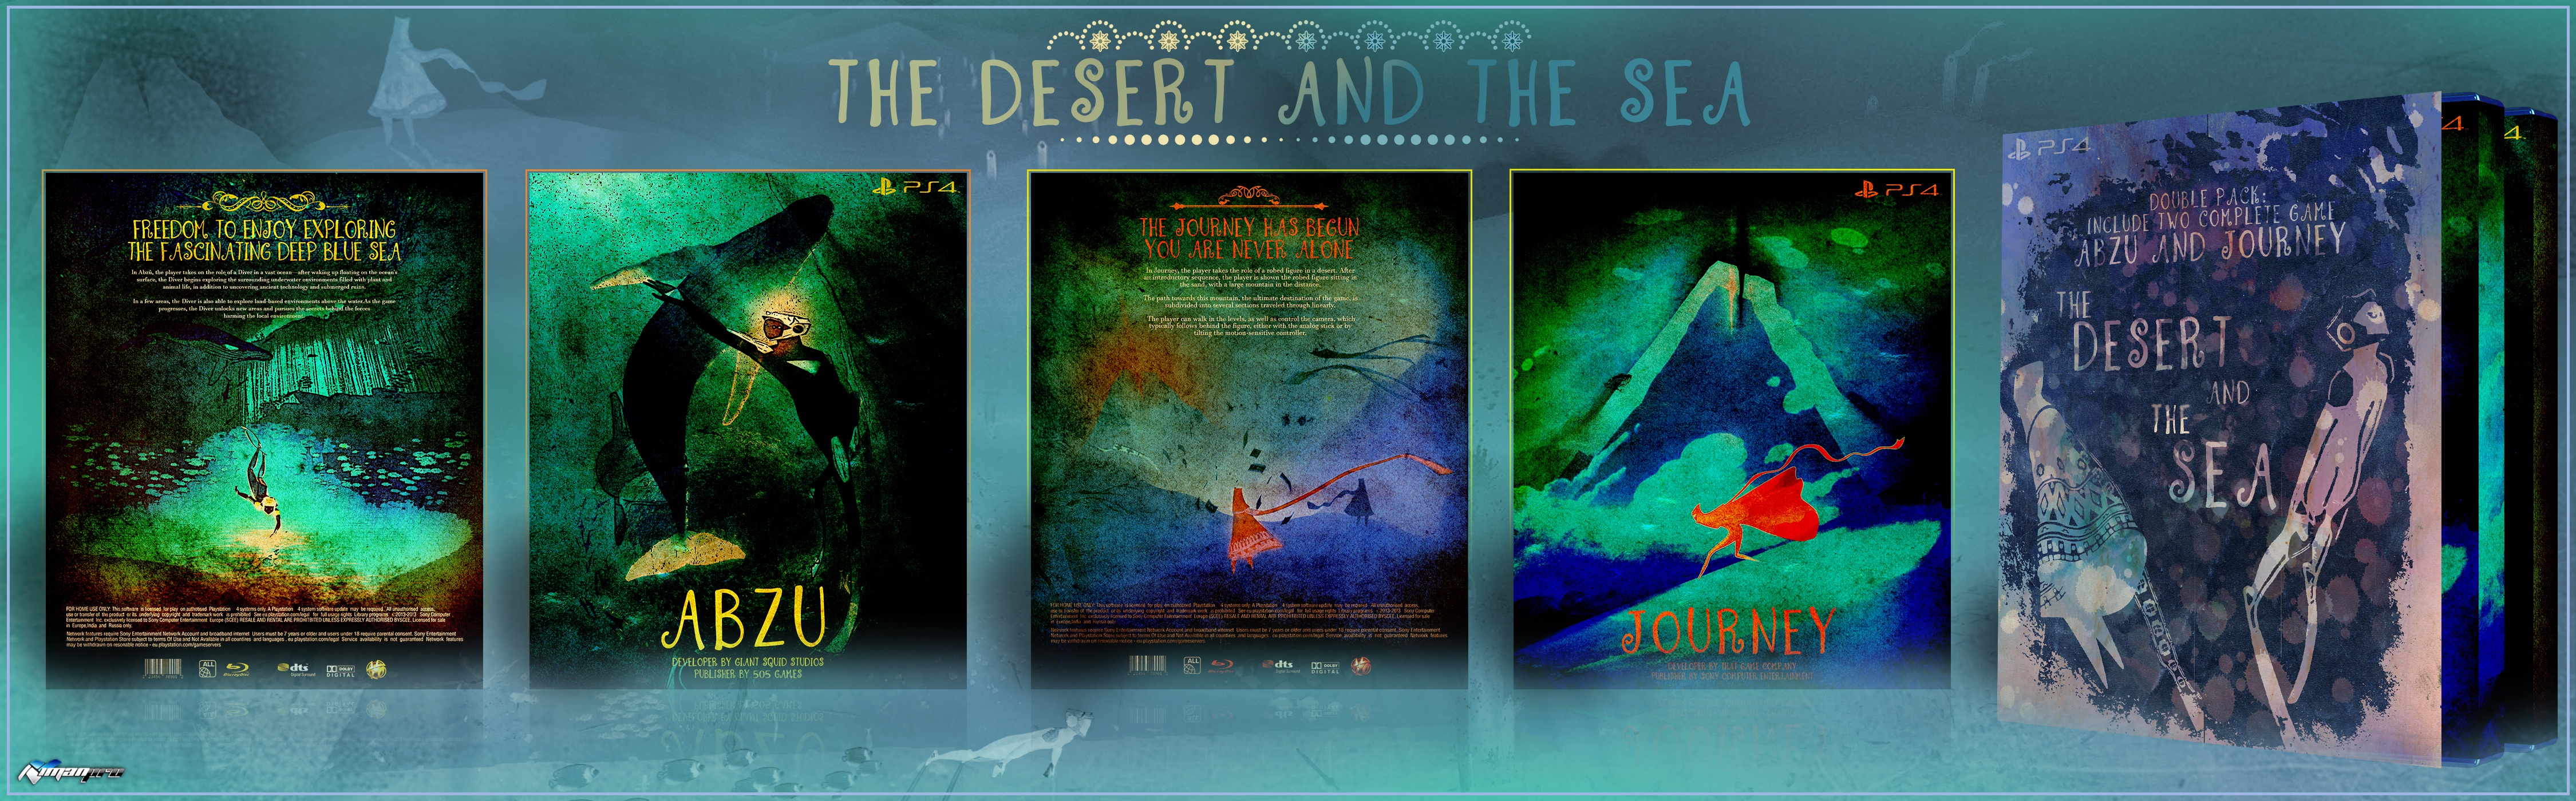 The Desert And The Sea box cover